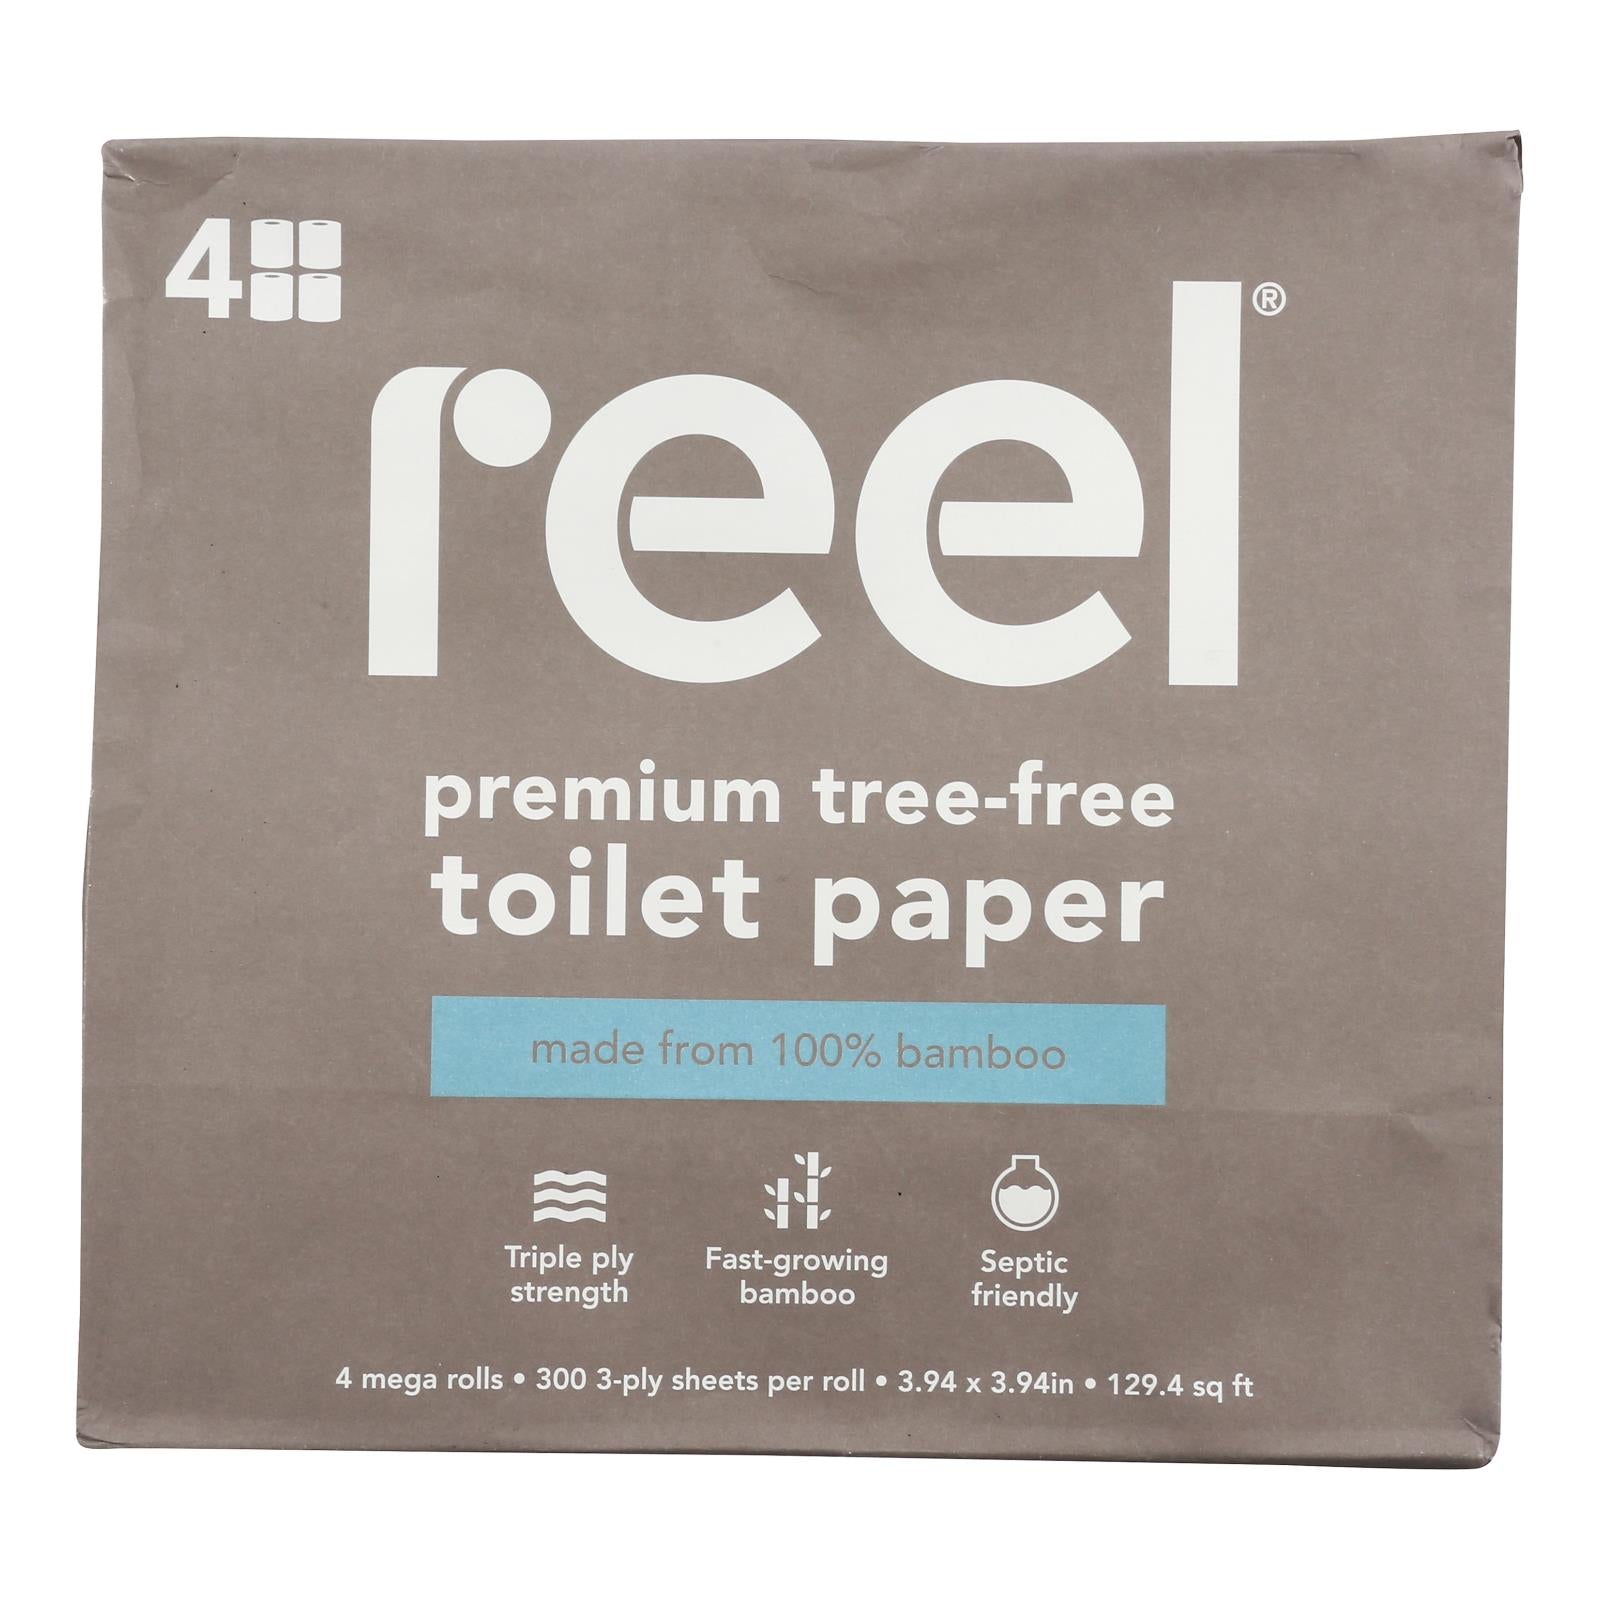 Reel Bamboo Toilet Paper - Case of 6 - 24 Count